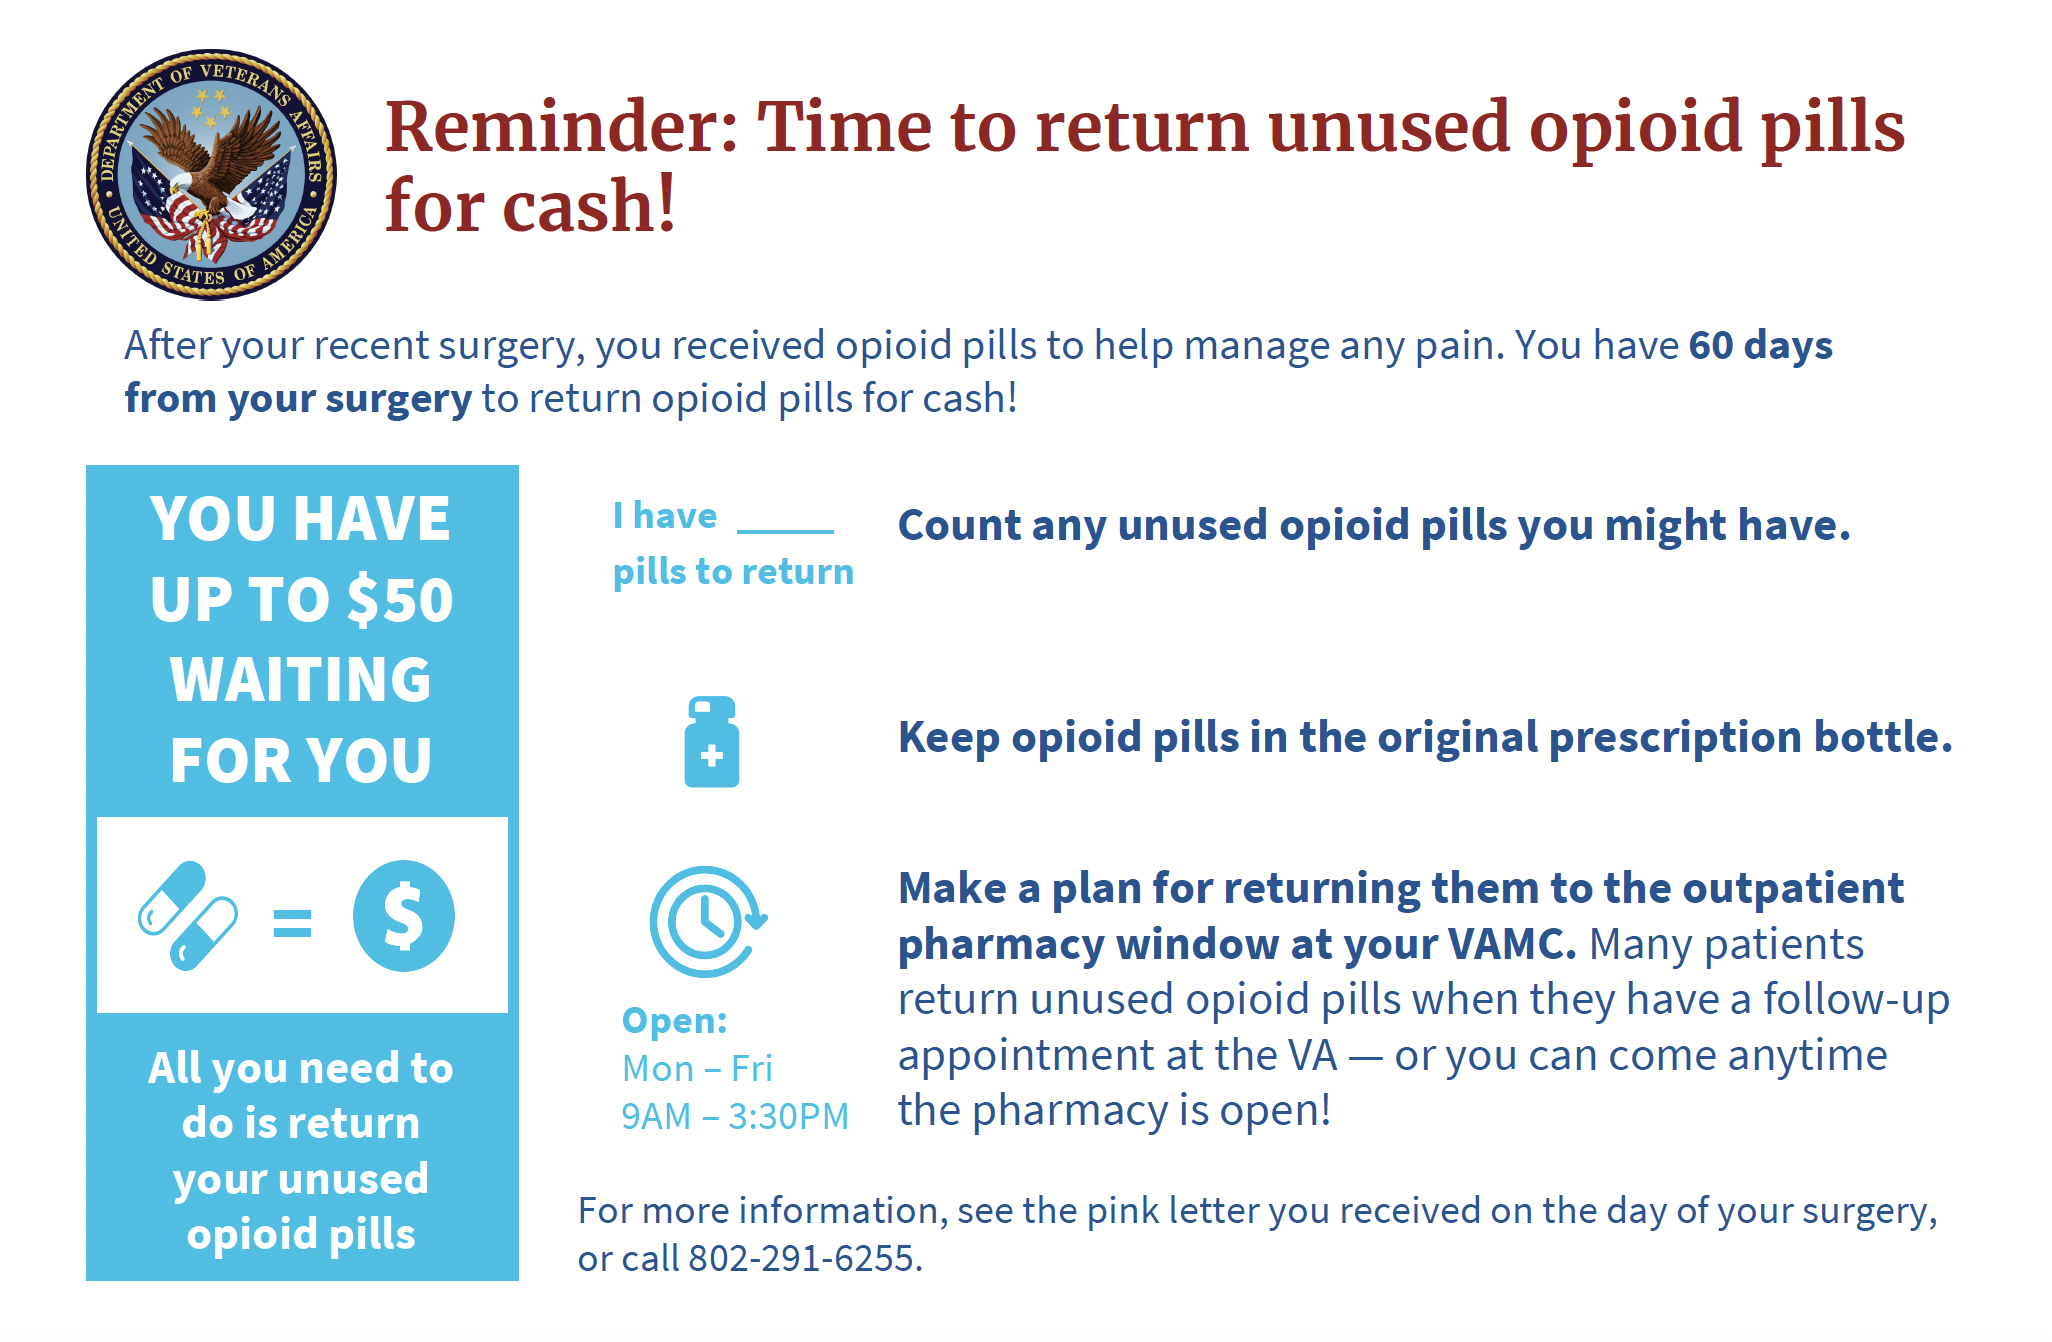 Reminder: Time to return unused opioid pills for cash! After your recent surgery, you received opioid pills to help manage any pain. You have 60 days from your surgery to return opioid pills for cash! You have up to $50 waiting for you. All you need to do is return your unused opioid pills. Count any unused opooid pills you might have. Keep opioid pills in the original prescription bottle. Make a plan for returning them to the outpatient pharmacy window at your VAMC. Many patients return unused opioid pills when they have a follow-up appointment at the VA - or you can come anytime the pharmacy is open (Monday - Friday 9AM-3:30PM). For more information, see the pink letter you received on the day of your surgery or call 802-291-6255.